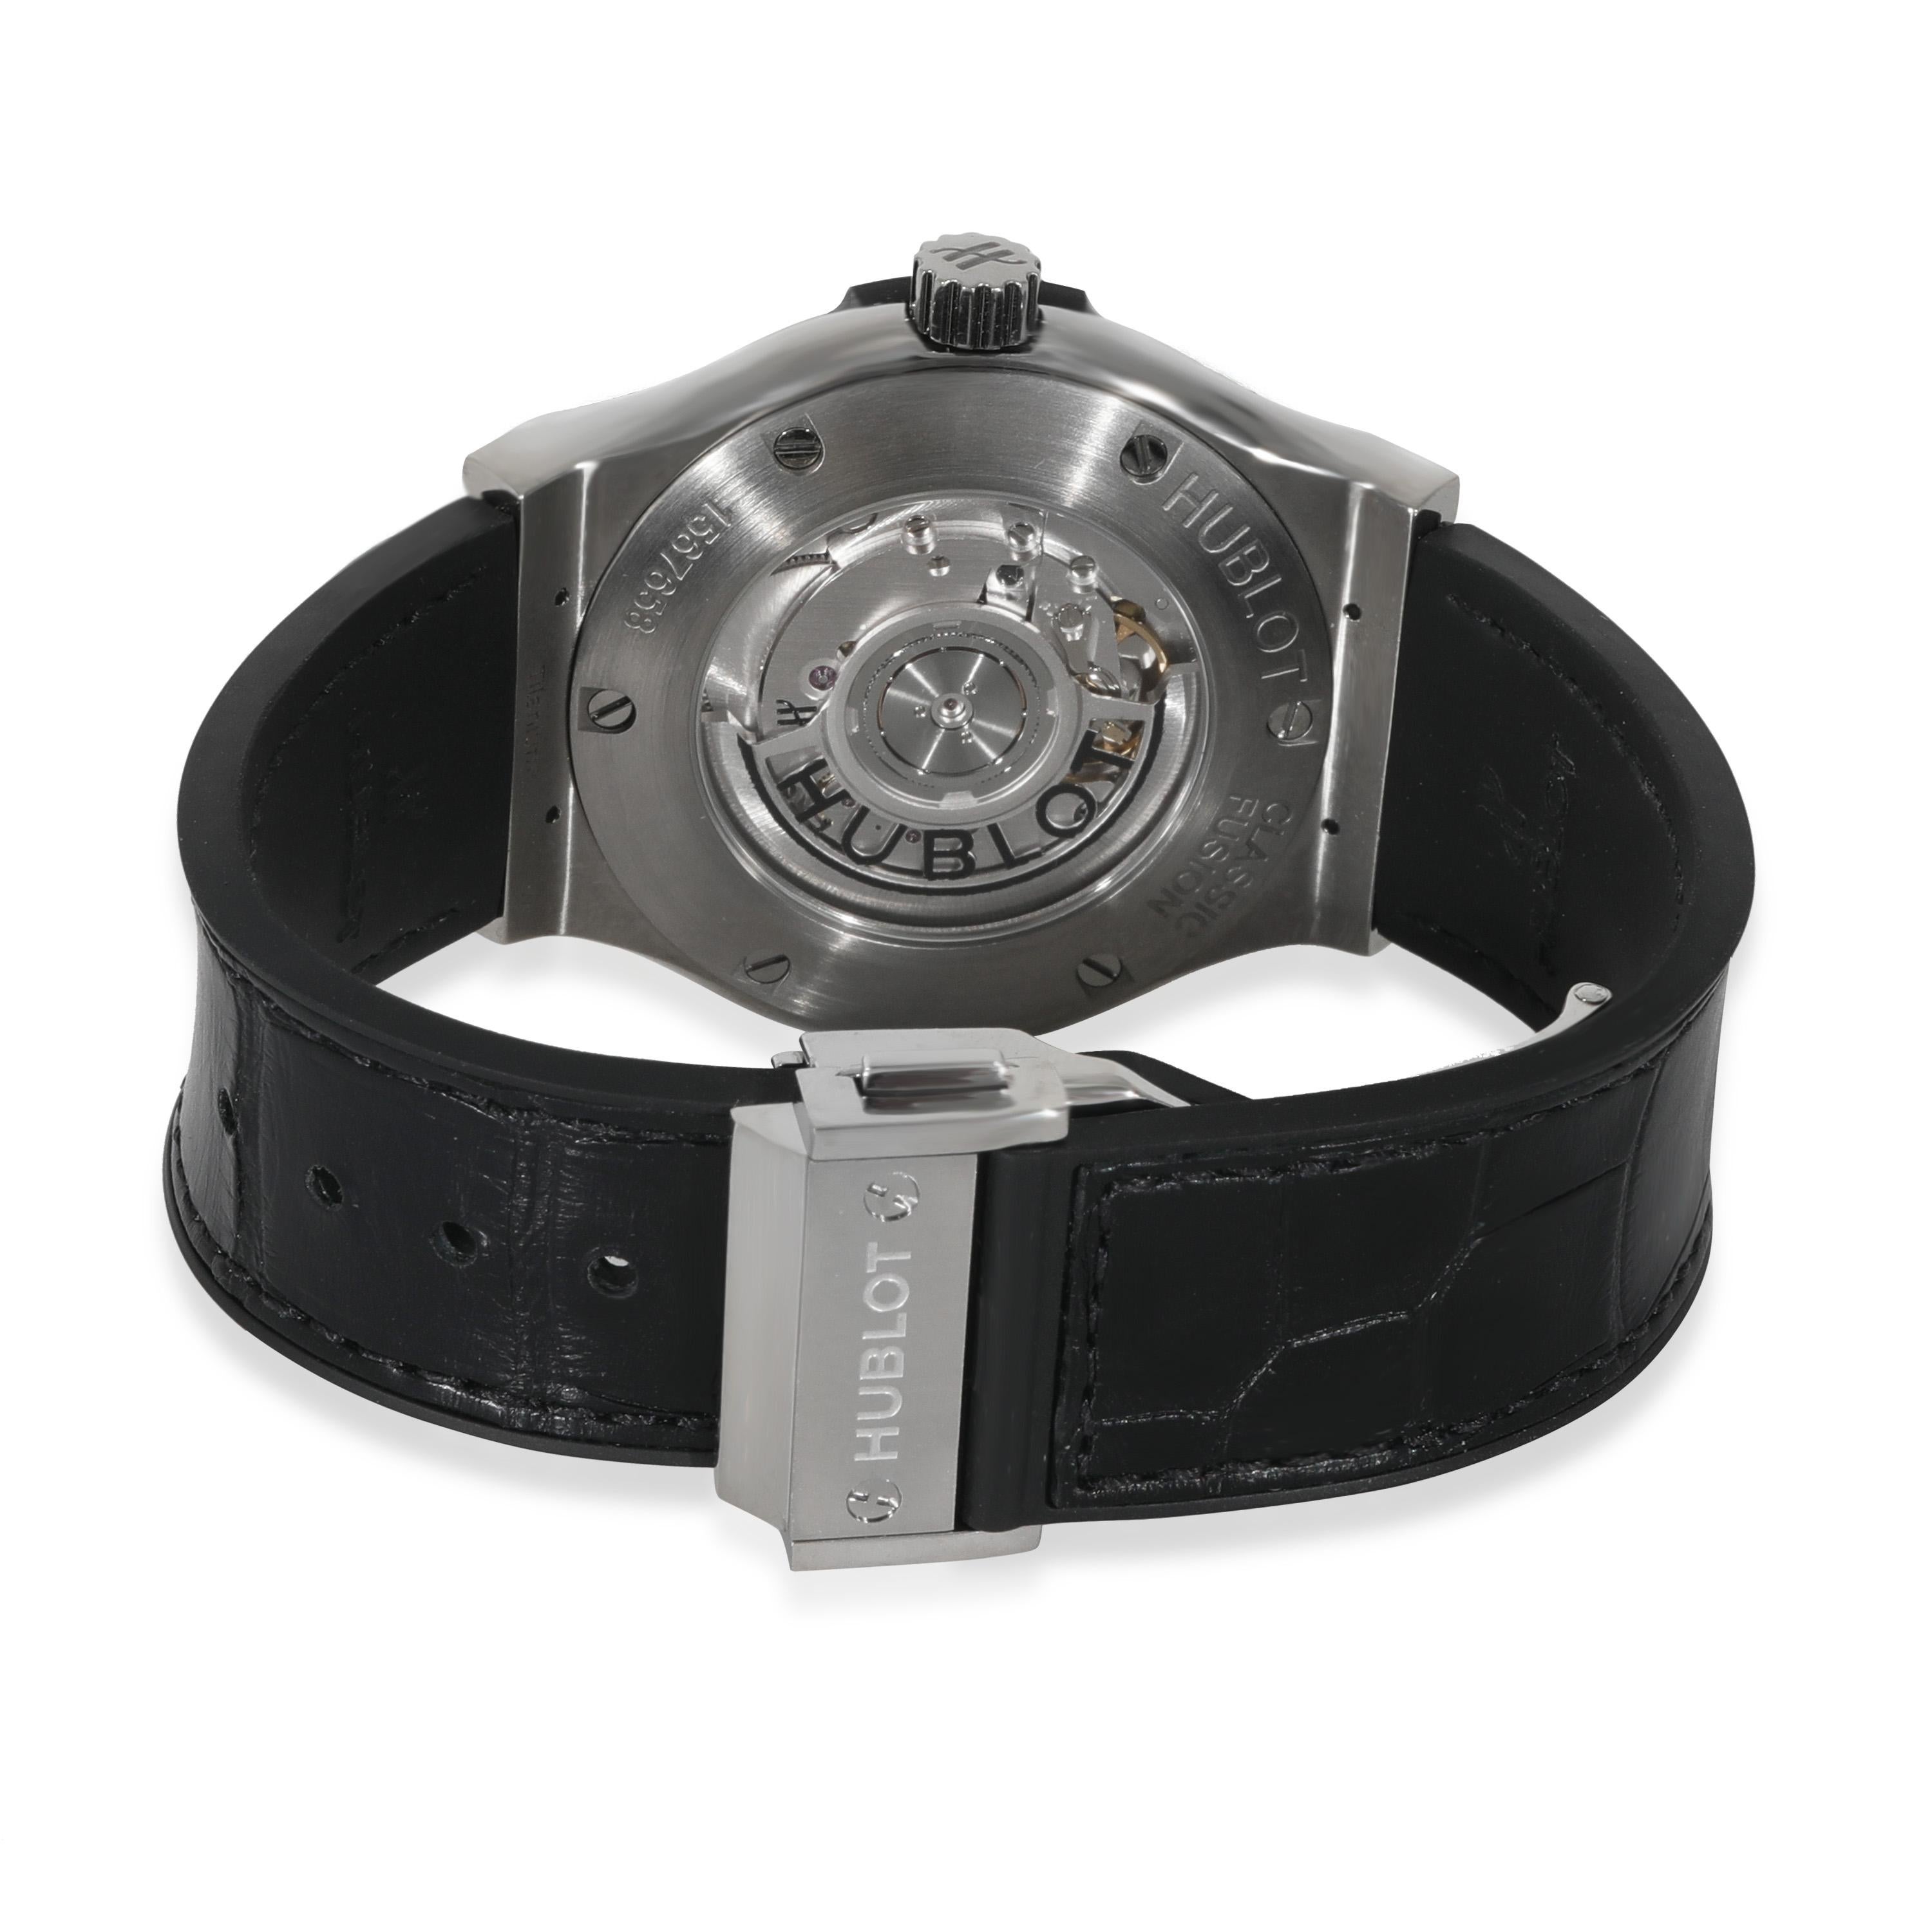 Hublot Classic Fusion 542.NX.1171.LR.1704 Unisex Watch in  Titanium

SKU: 128674

PRIMARY DETAILS
Brand: Hublot
Model: Classic Fusion
Country of Origin: Switzerland
Movement Type: Mechanical: Automatic/Kinetic
Year Manufactured: 2022
Year of